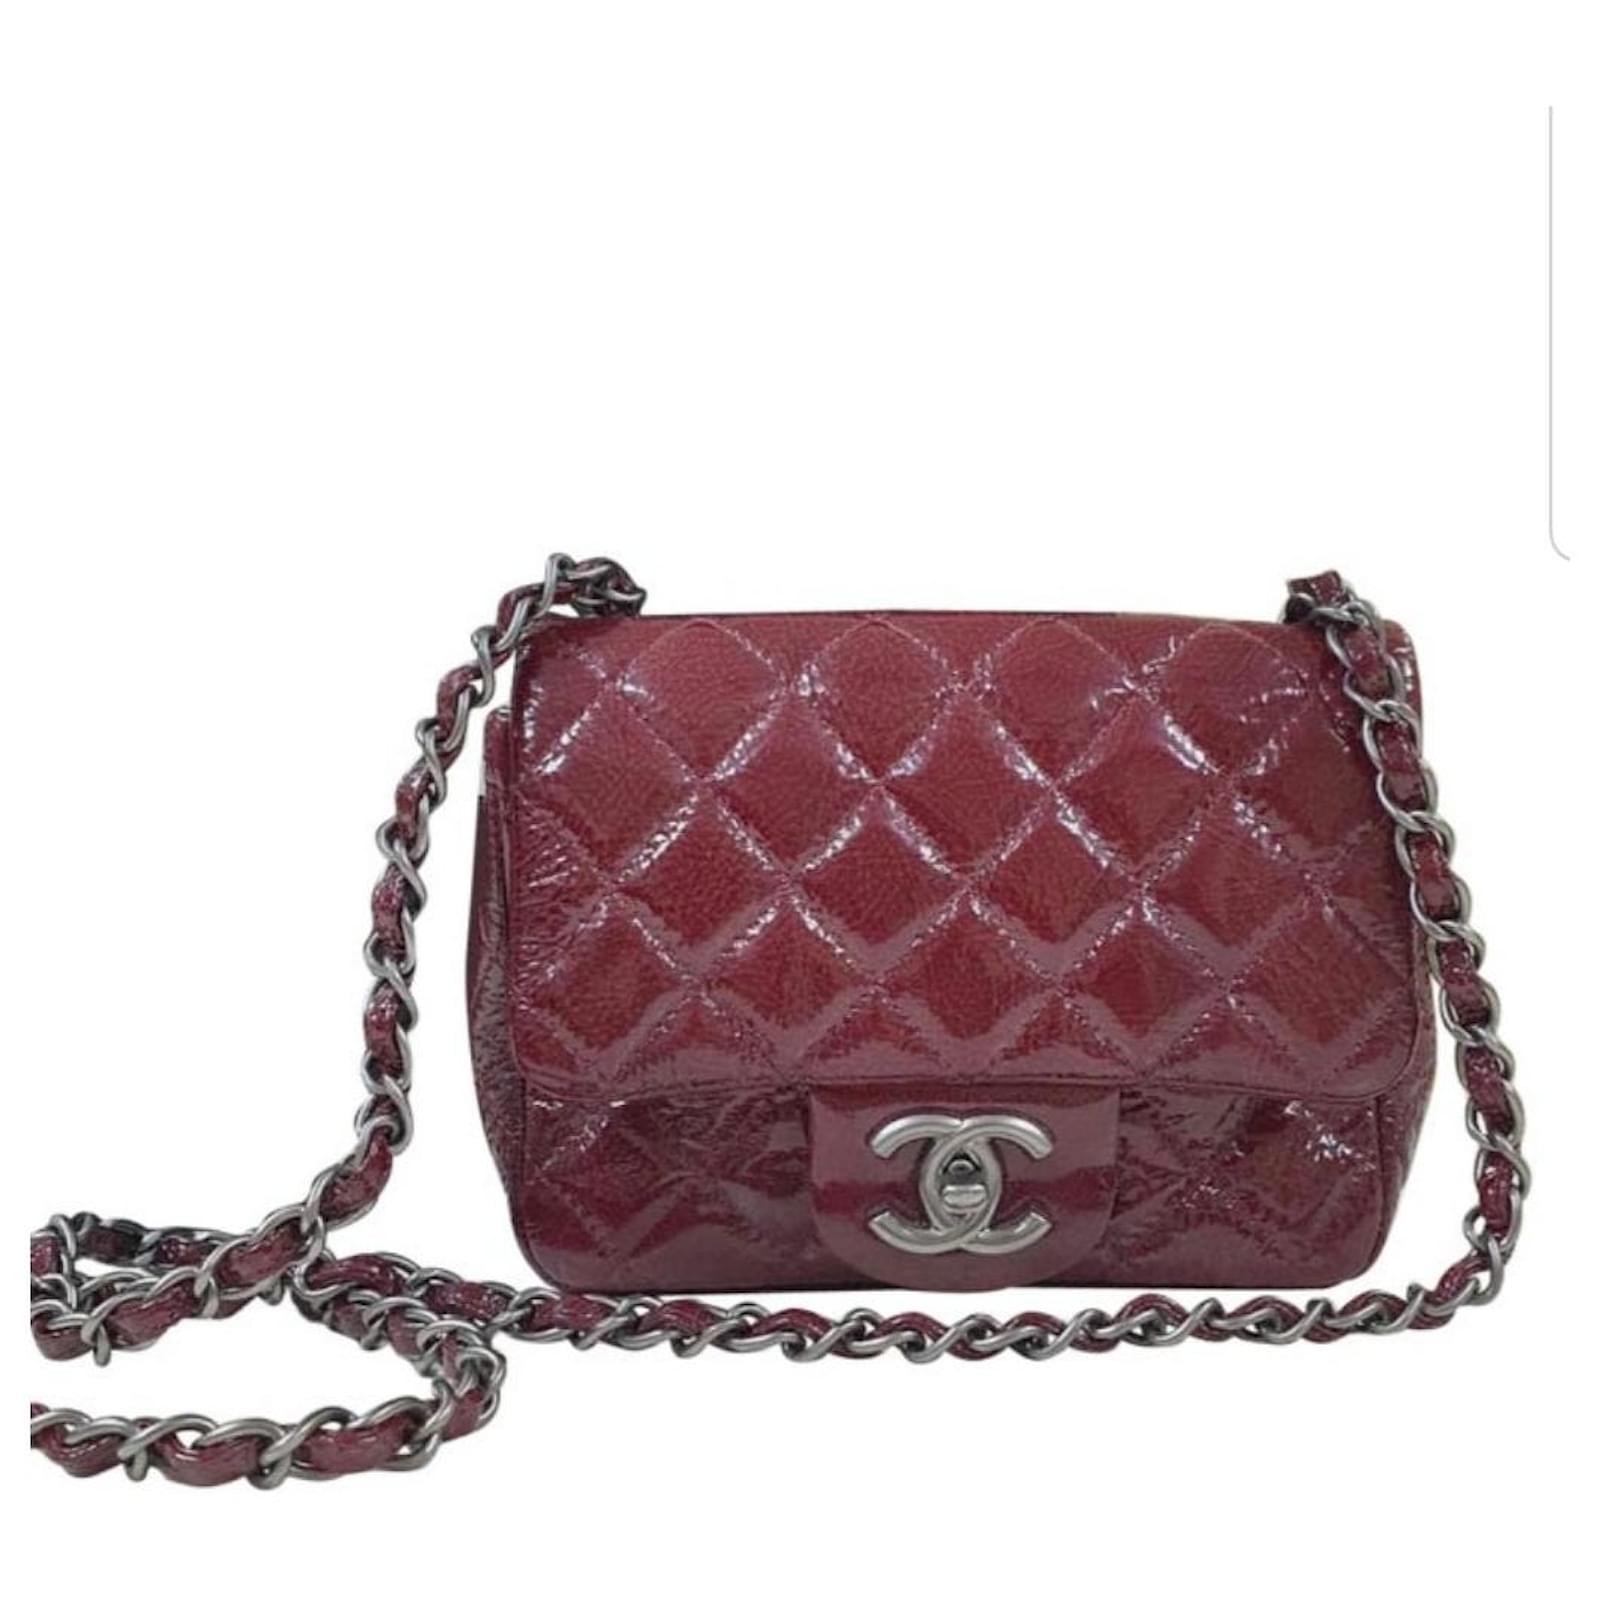 Chanel Burgundy Quilted Patent Leather Classic Square Mini Flap